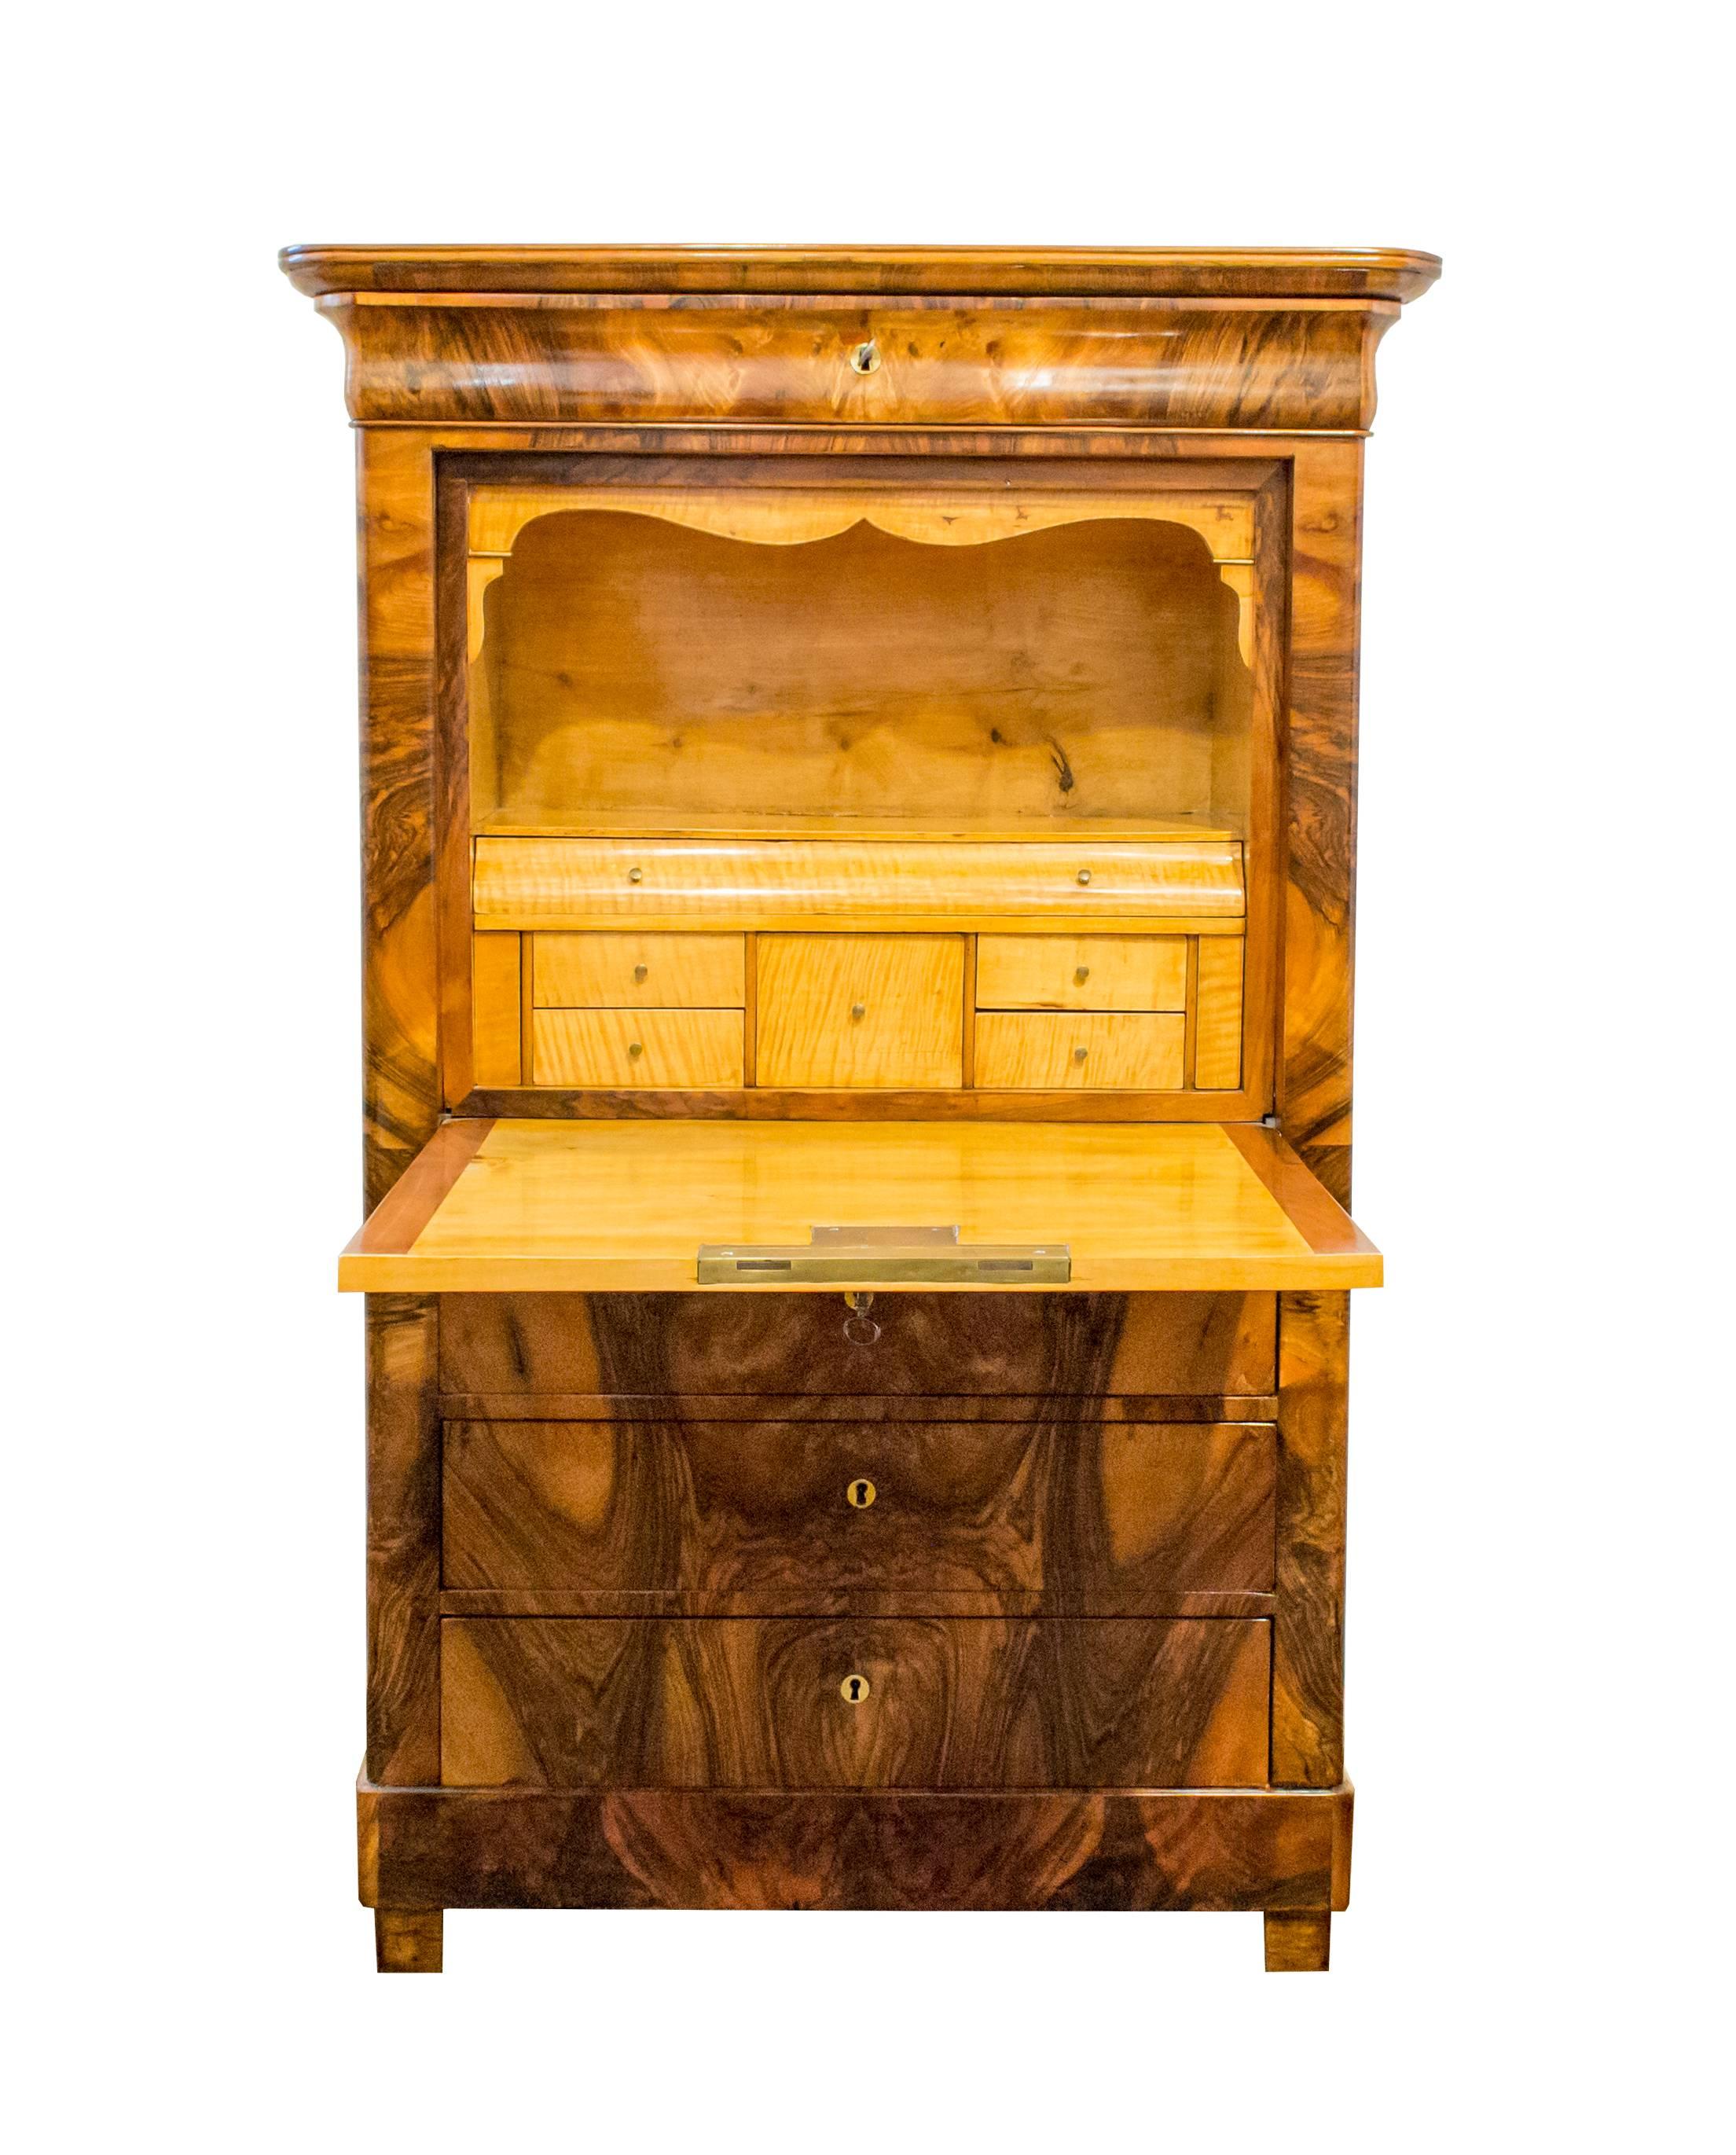 A beautiful small Secretaire made of walnut veneer from the time of Biedermeier.
The interior of the Secretaire is made of birchwood. In very good restored condition.
 